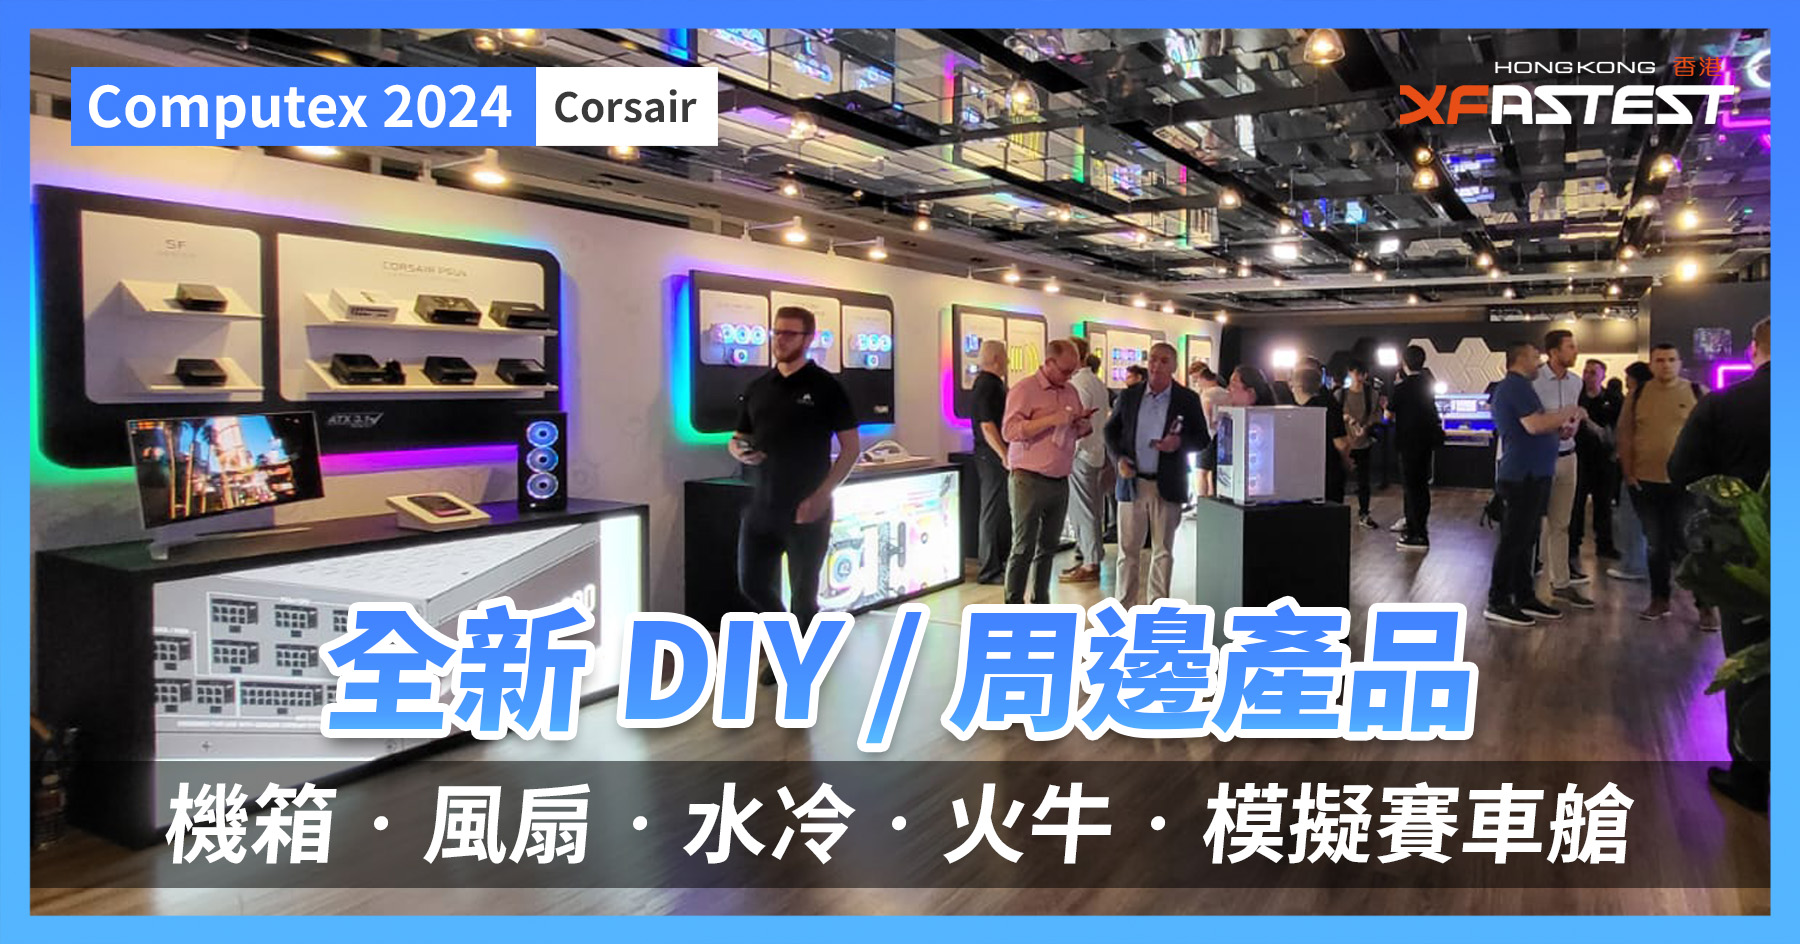 [Computex 2024] Corsair introduces new merchandise for DIY/peripheral chassis‧fan‧water cooling‧fireplace cow‧sim racing cabin